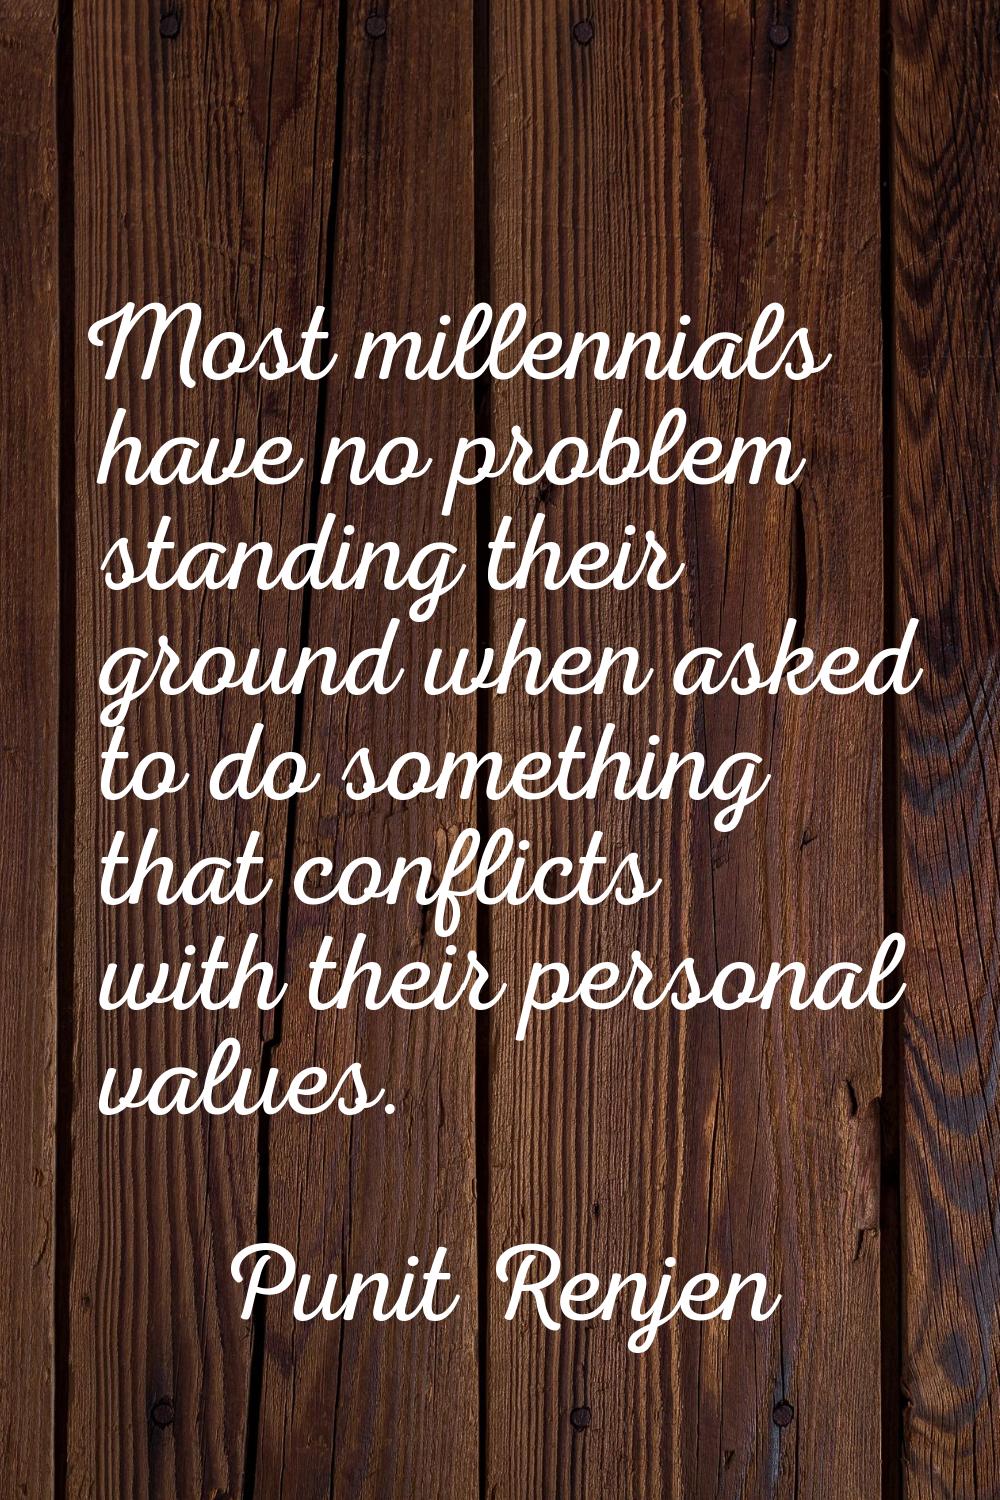 Most millennials have no problem standing their ground when asked to do something that conflicts wi